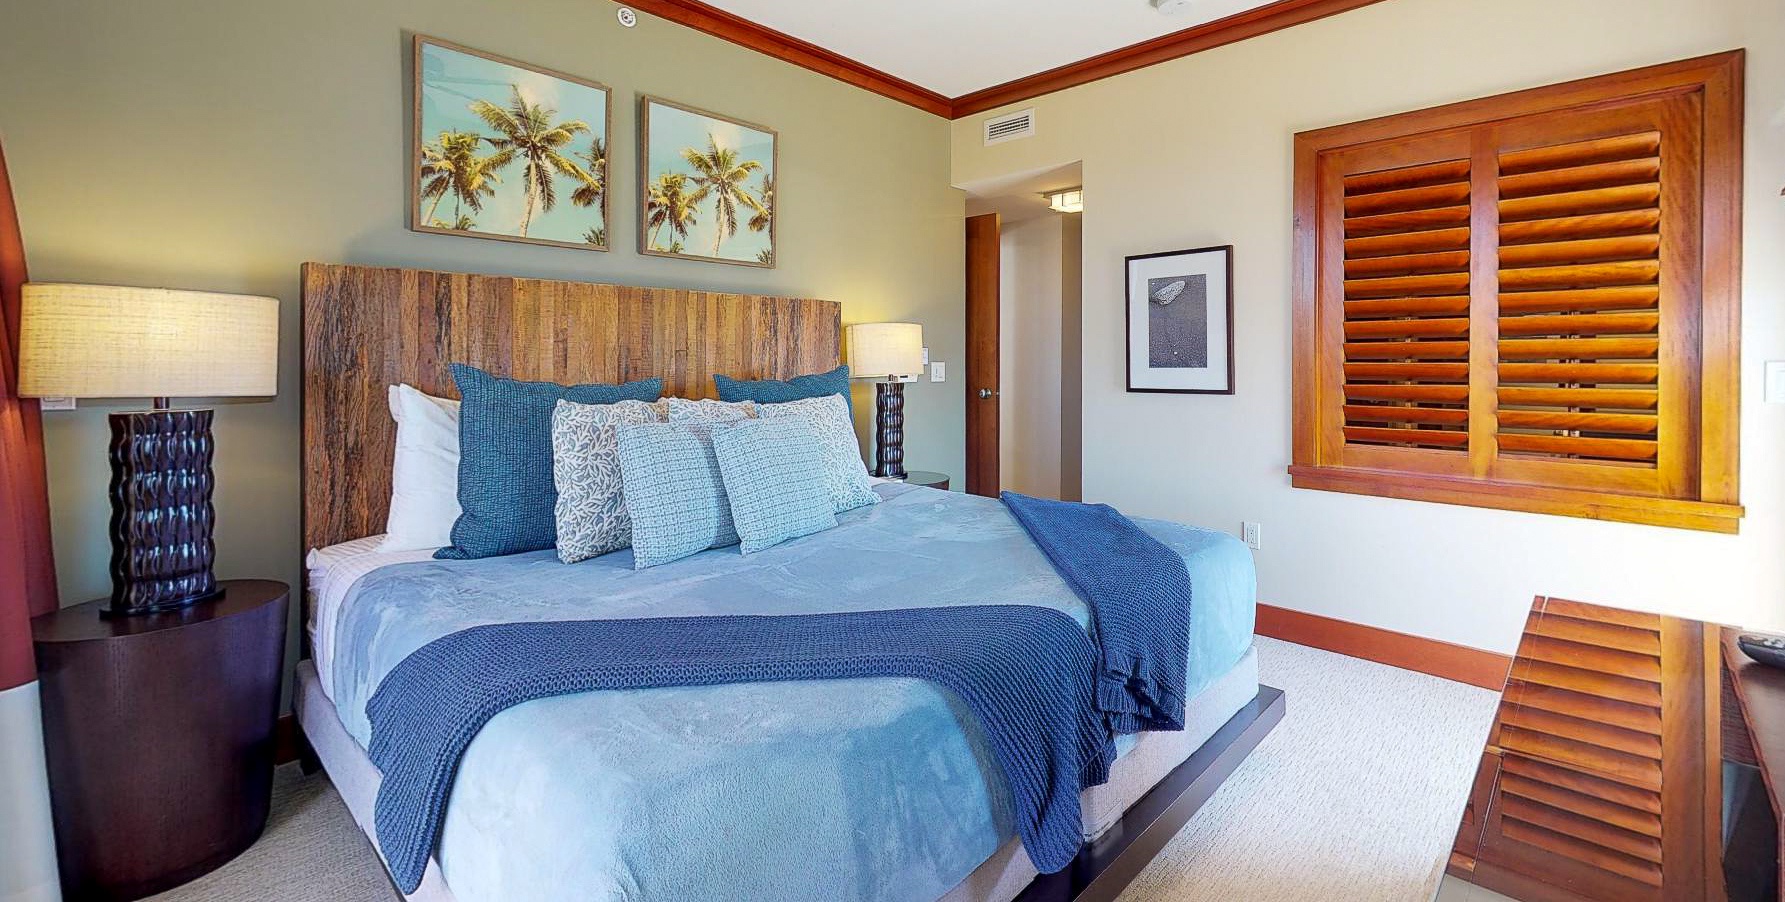 Kapolei Vacation Rentals, Ko Olina Beach Villas O1121 - The spacious primary guest bedroom with a king bed.